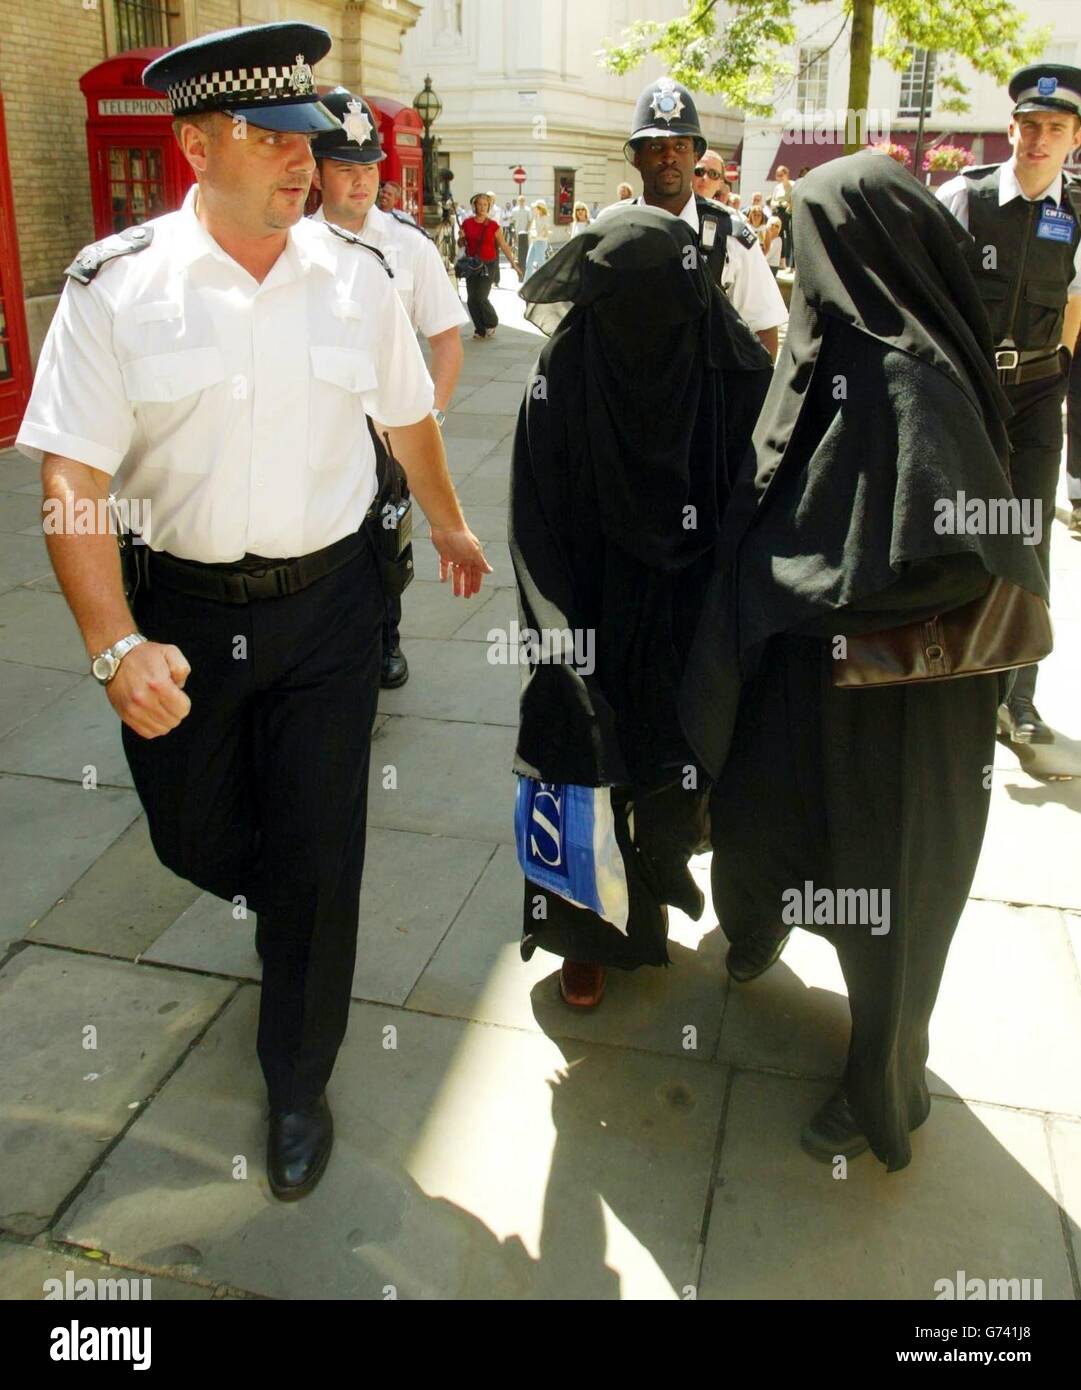 Family members are escorted by police officers as they leave Bow Street Magistrates Court after Babar Ahmad, 30, of Fountain Road, Tooting, south London, appeared following his arrest Thursday on an extradition warrant issued on behalf of the USA. The women, who declined to identify themselves to journalists, were in court where it was alleged that in December last year Ahmad was found in possession of a document detailing a US naval battle group operating the Strait of Hormoz in the Gulf in April 2001. Stock Photo